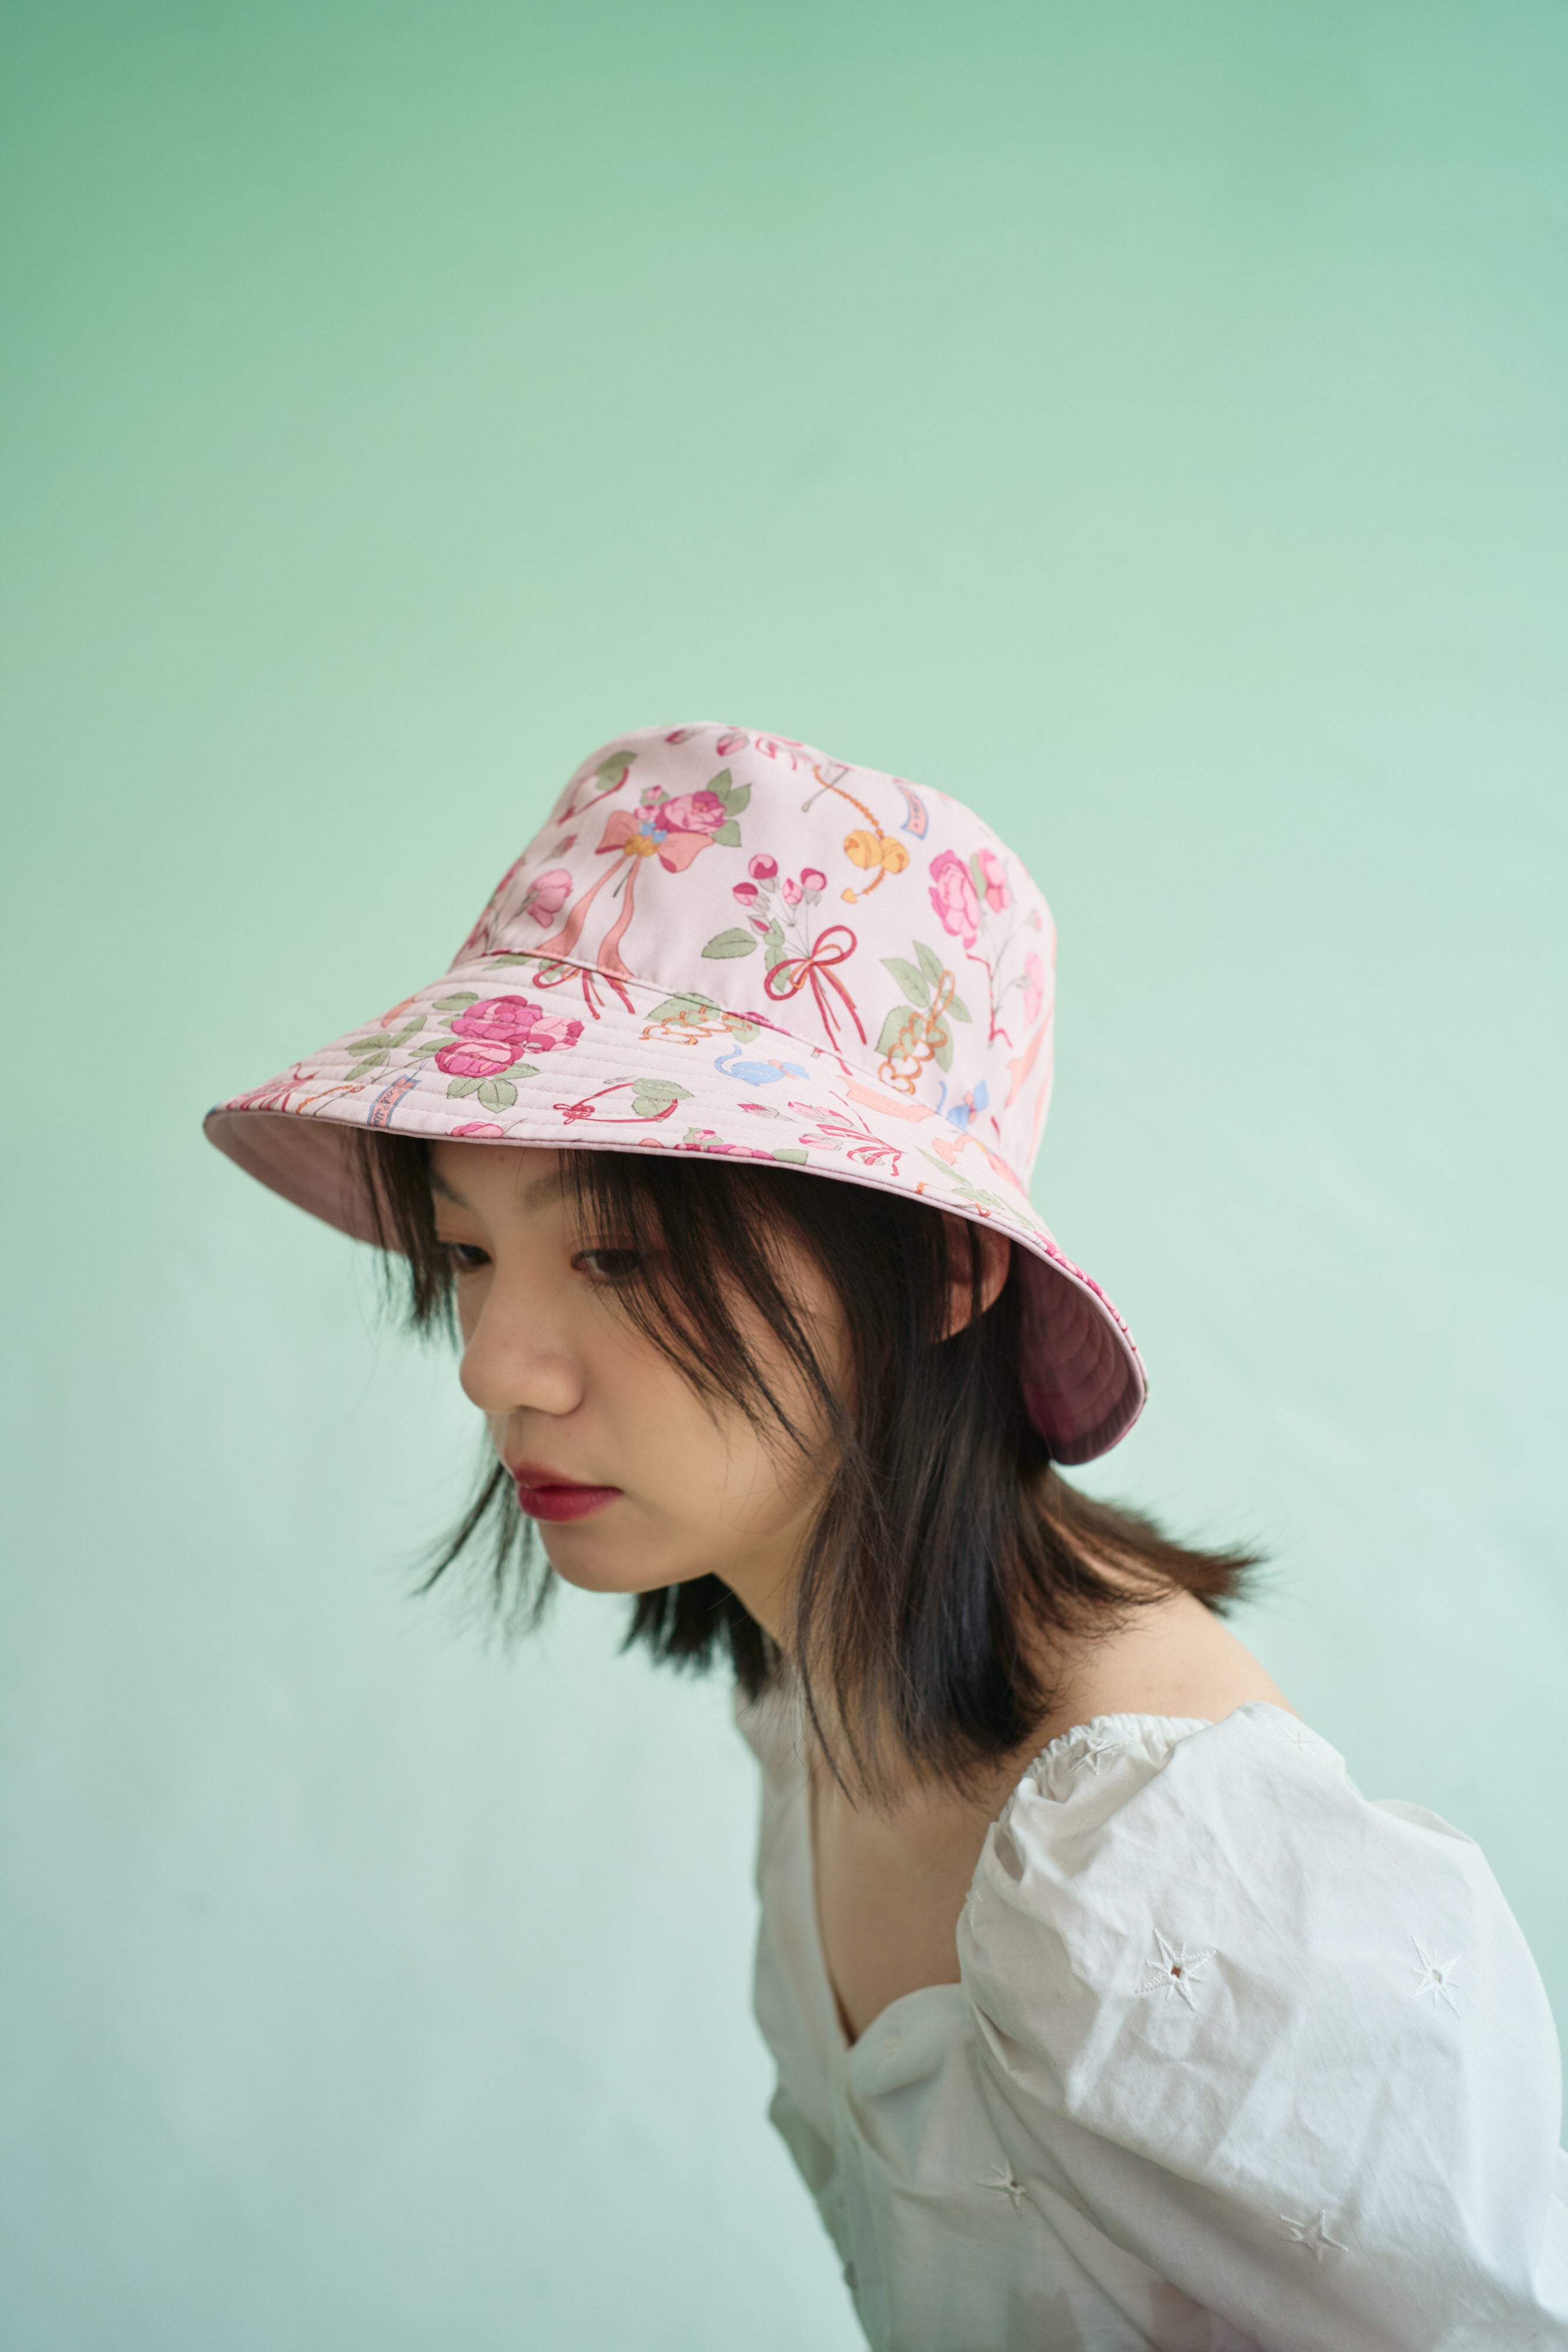 “Love Kitty” Embroidered Reversible Bucket Hat - LOST PATTERN Hats